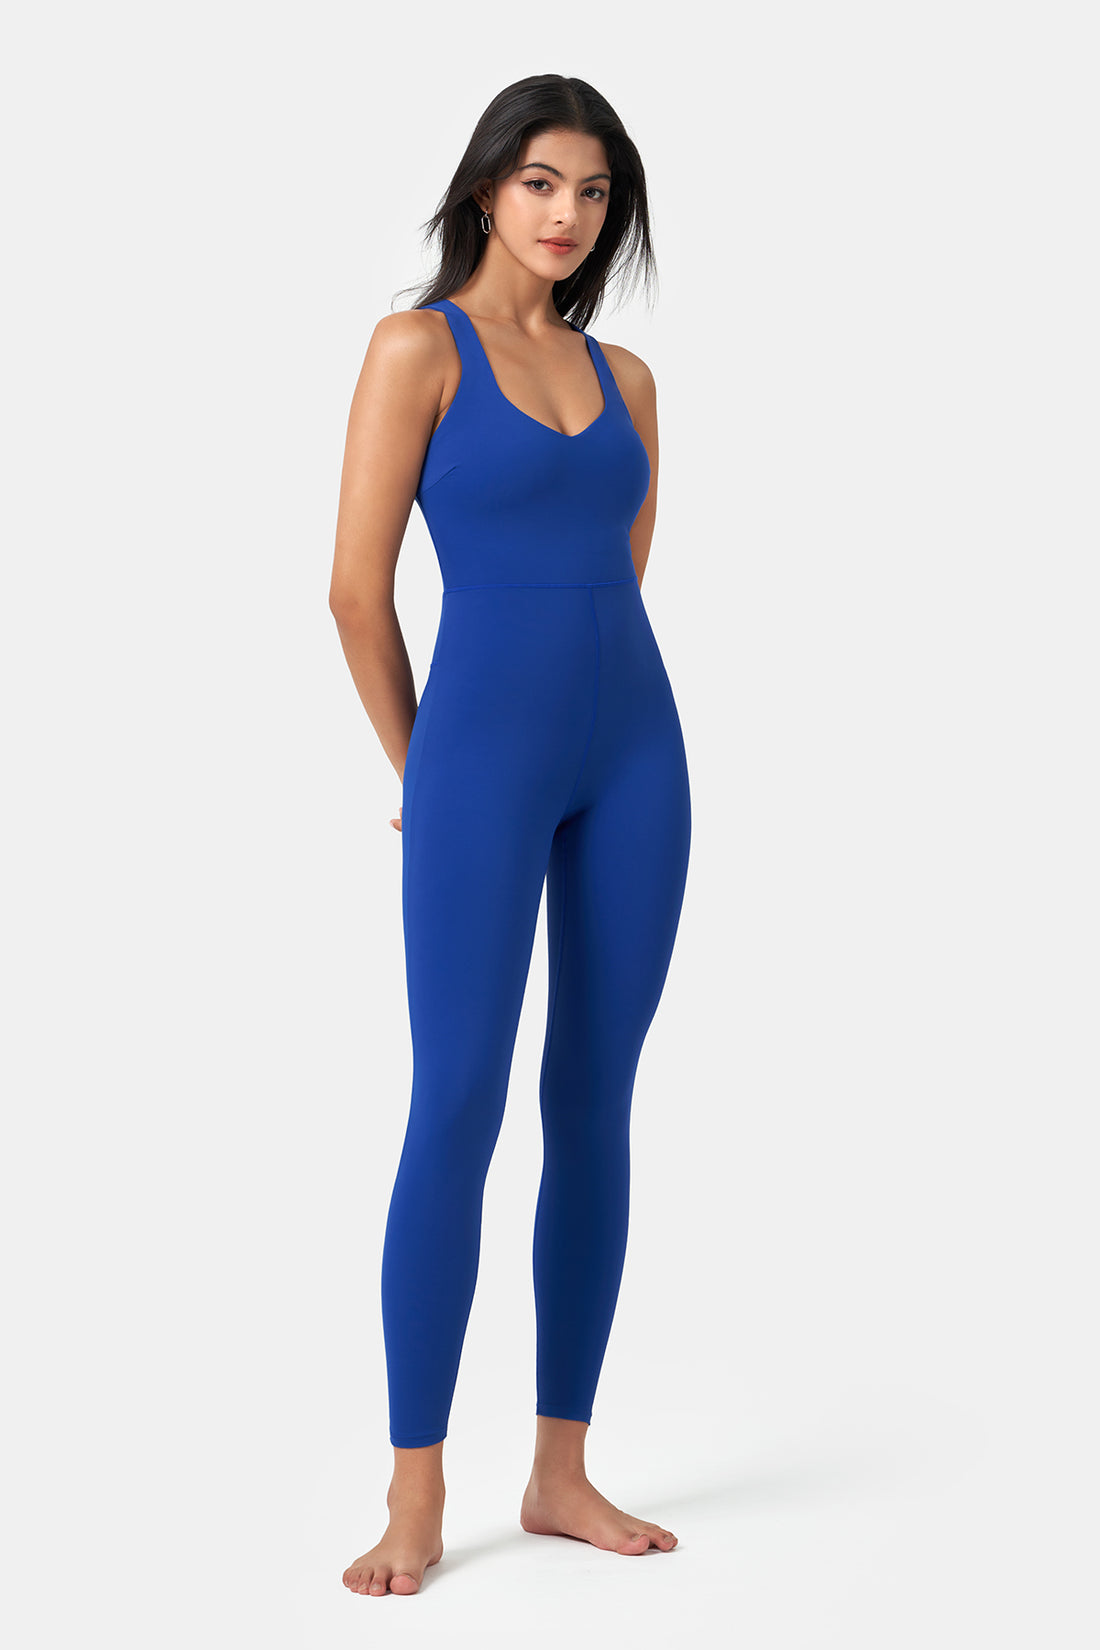 Form-Fitting Cross-Back Jumpsuit with Full-Length Pants